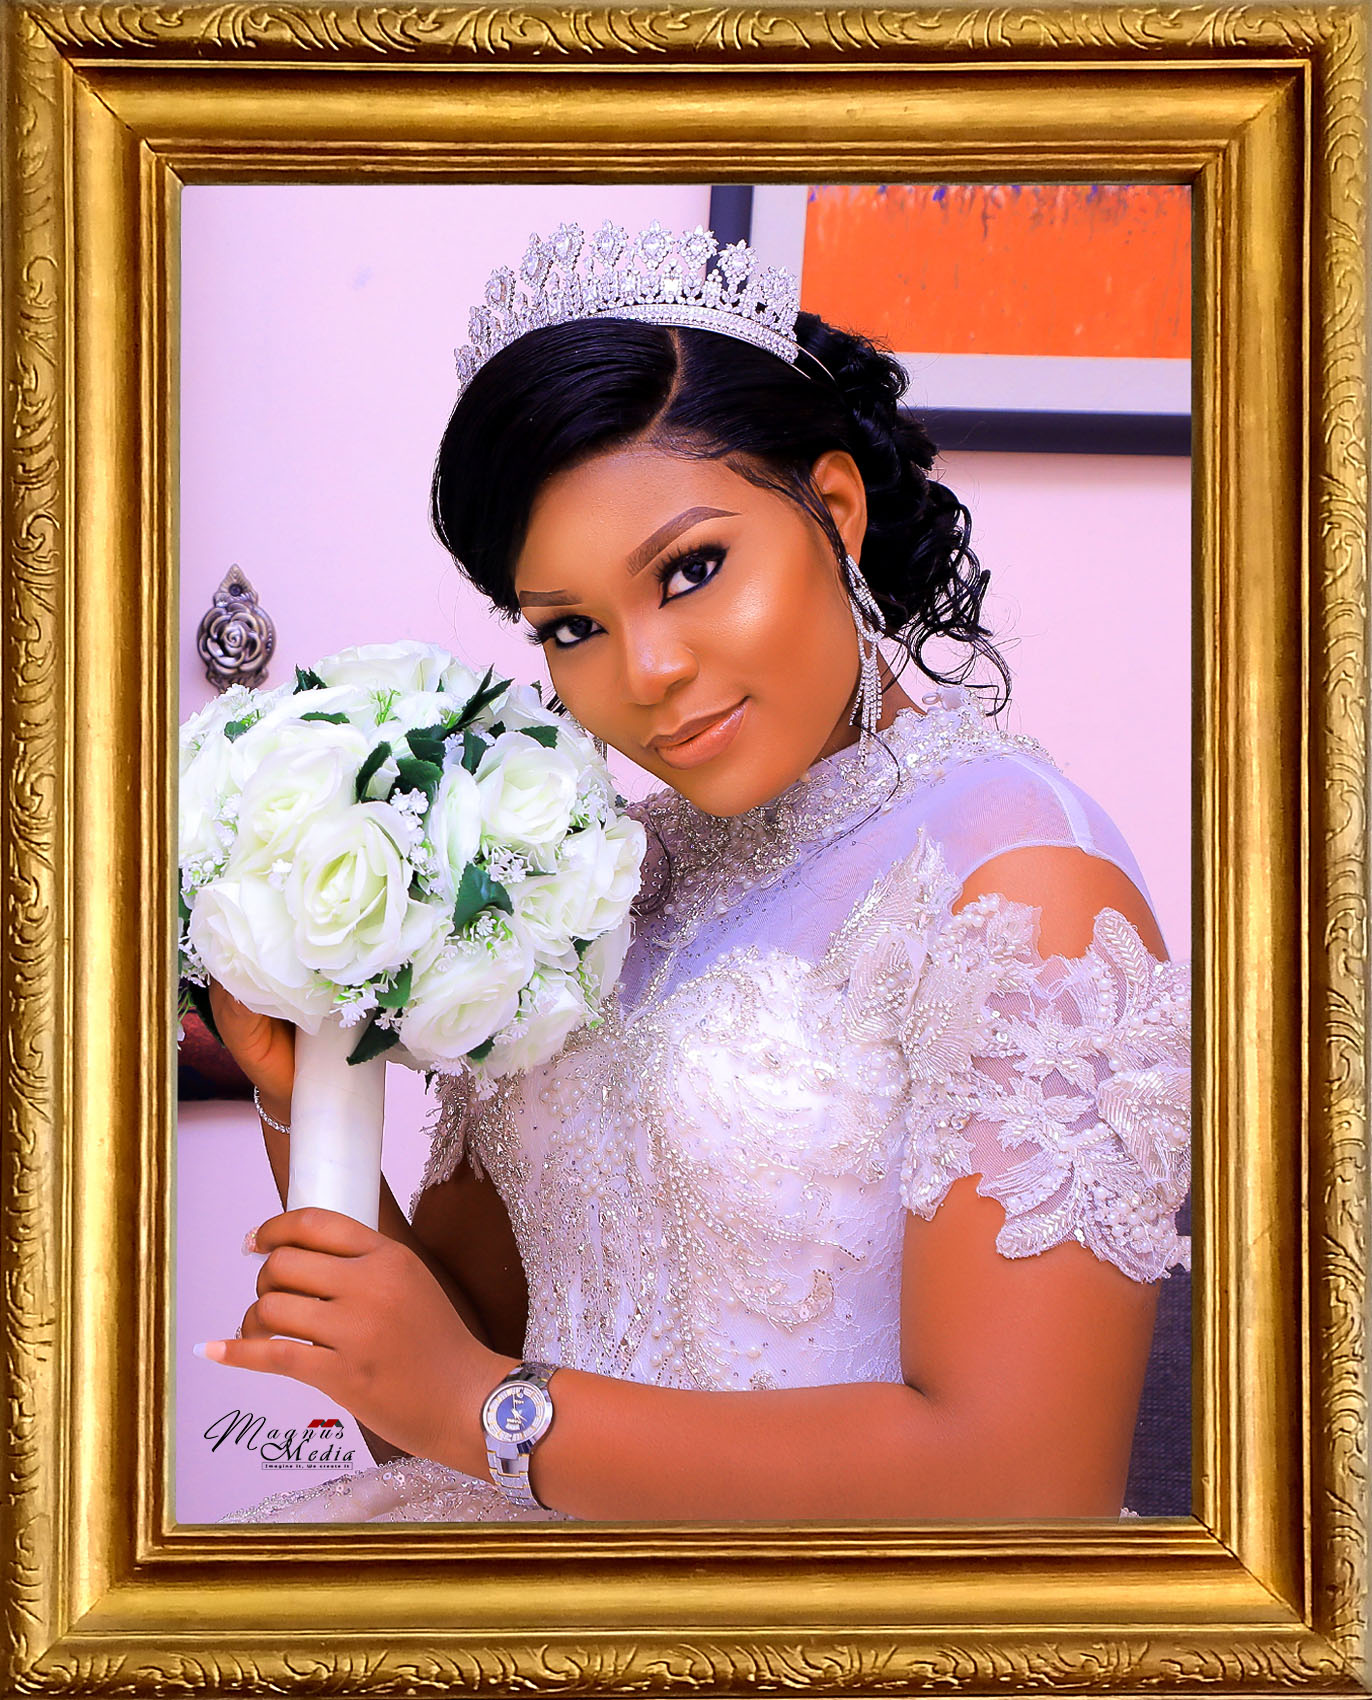 Wedding event and photo enlargement 